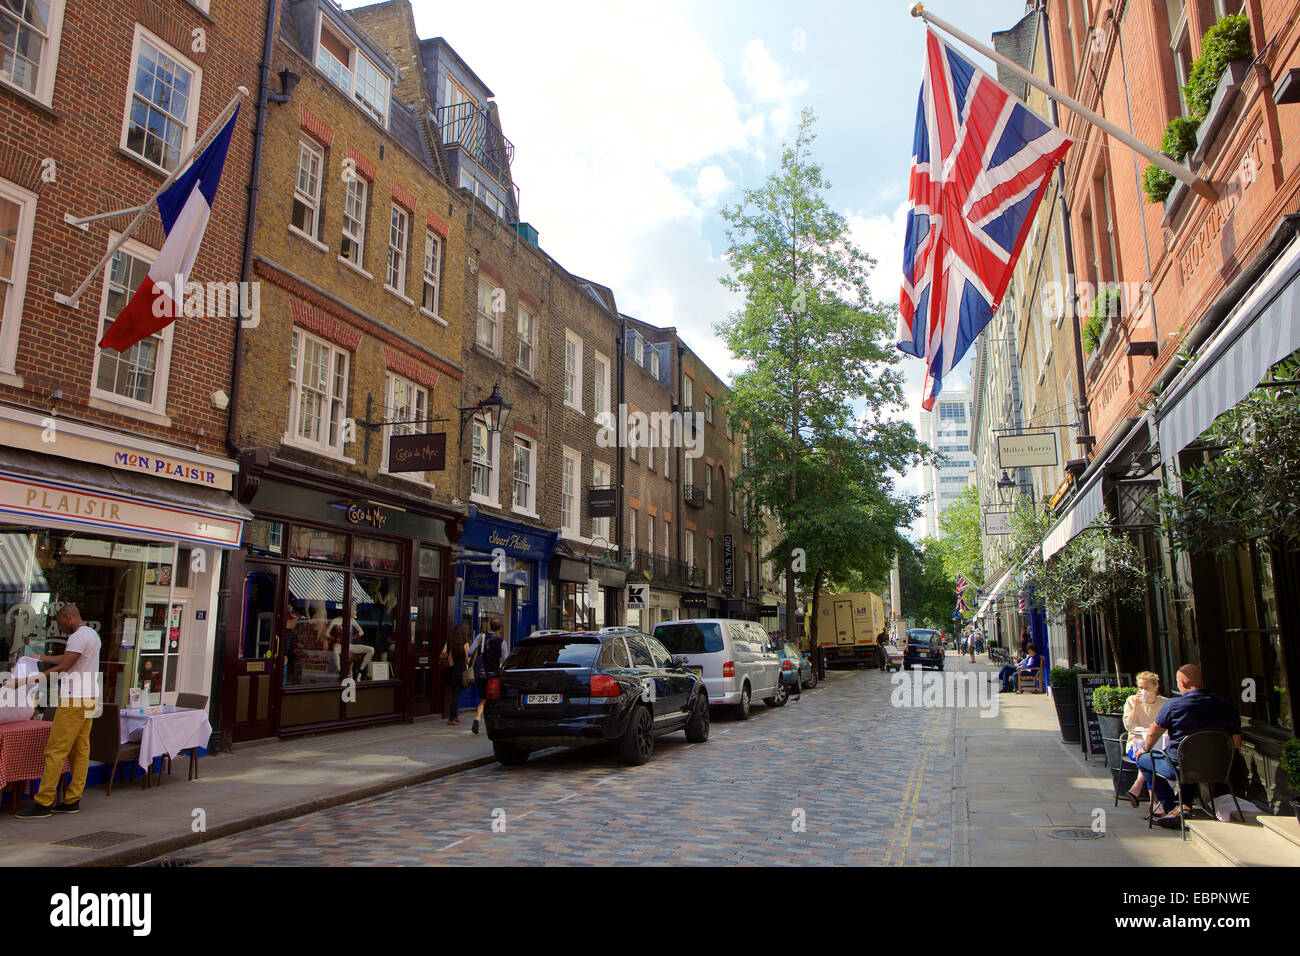 Monmouth Street near Seven Dials in Covent Garden, London, England, United Kingdom, Europe Stock Photo